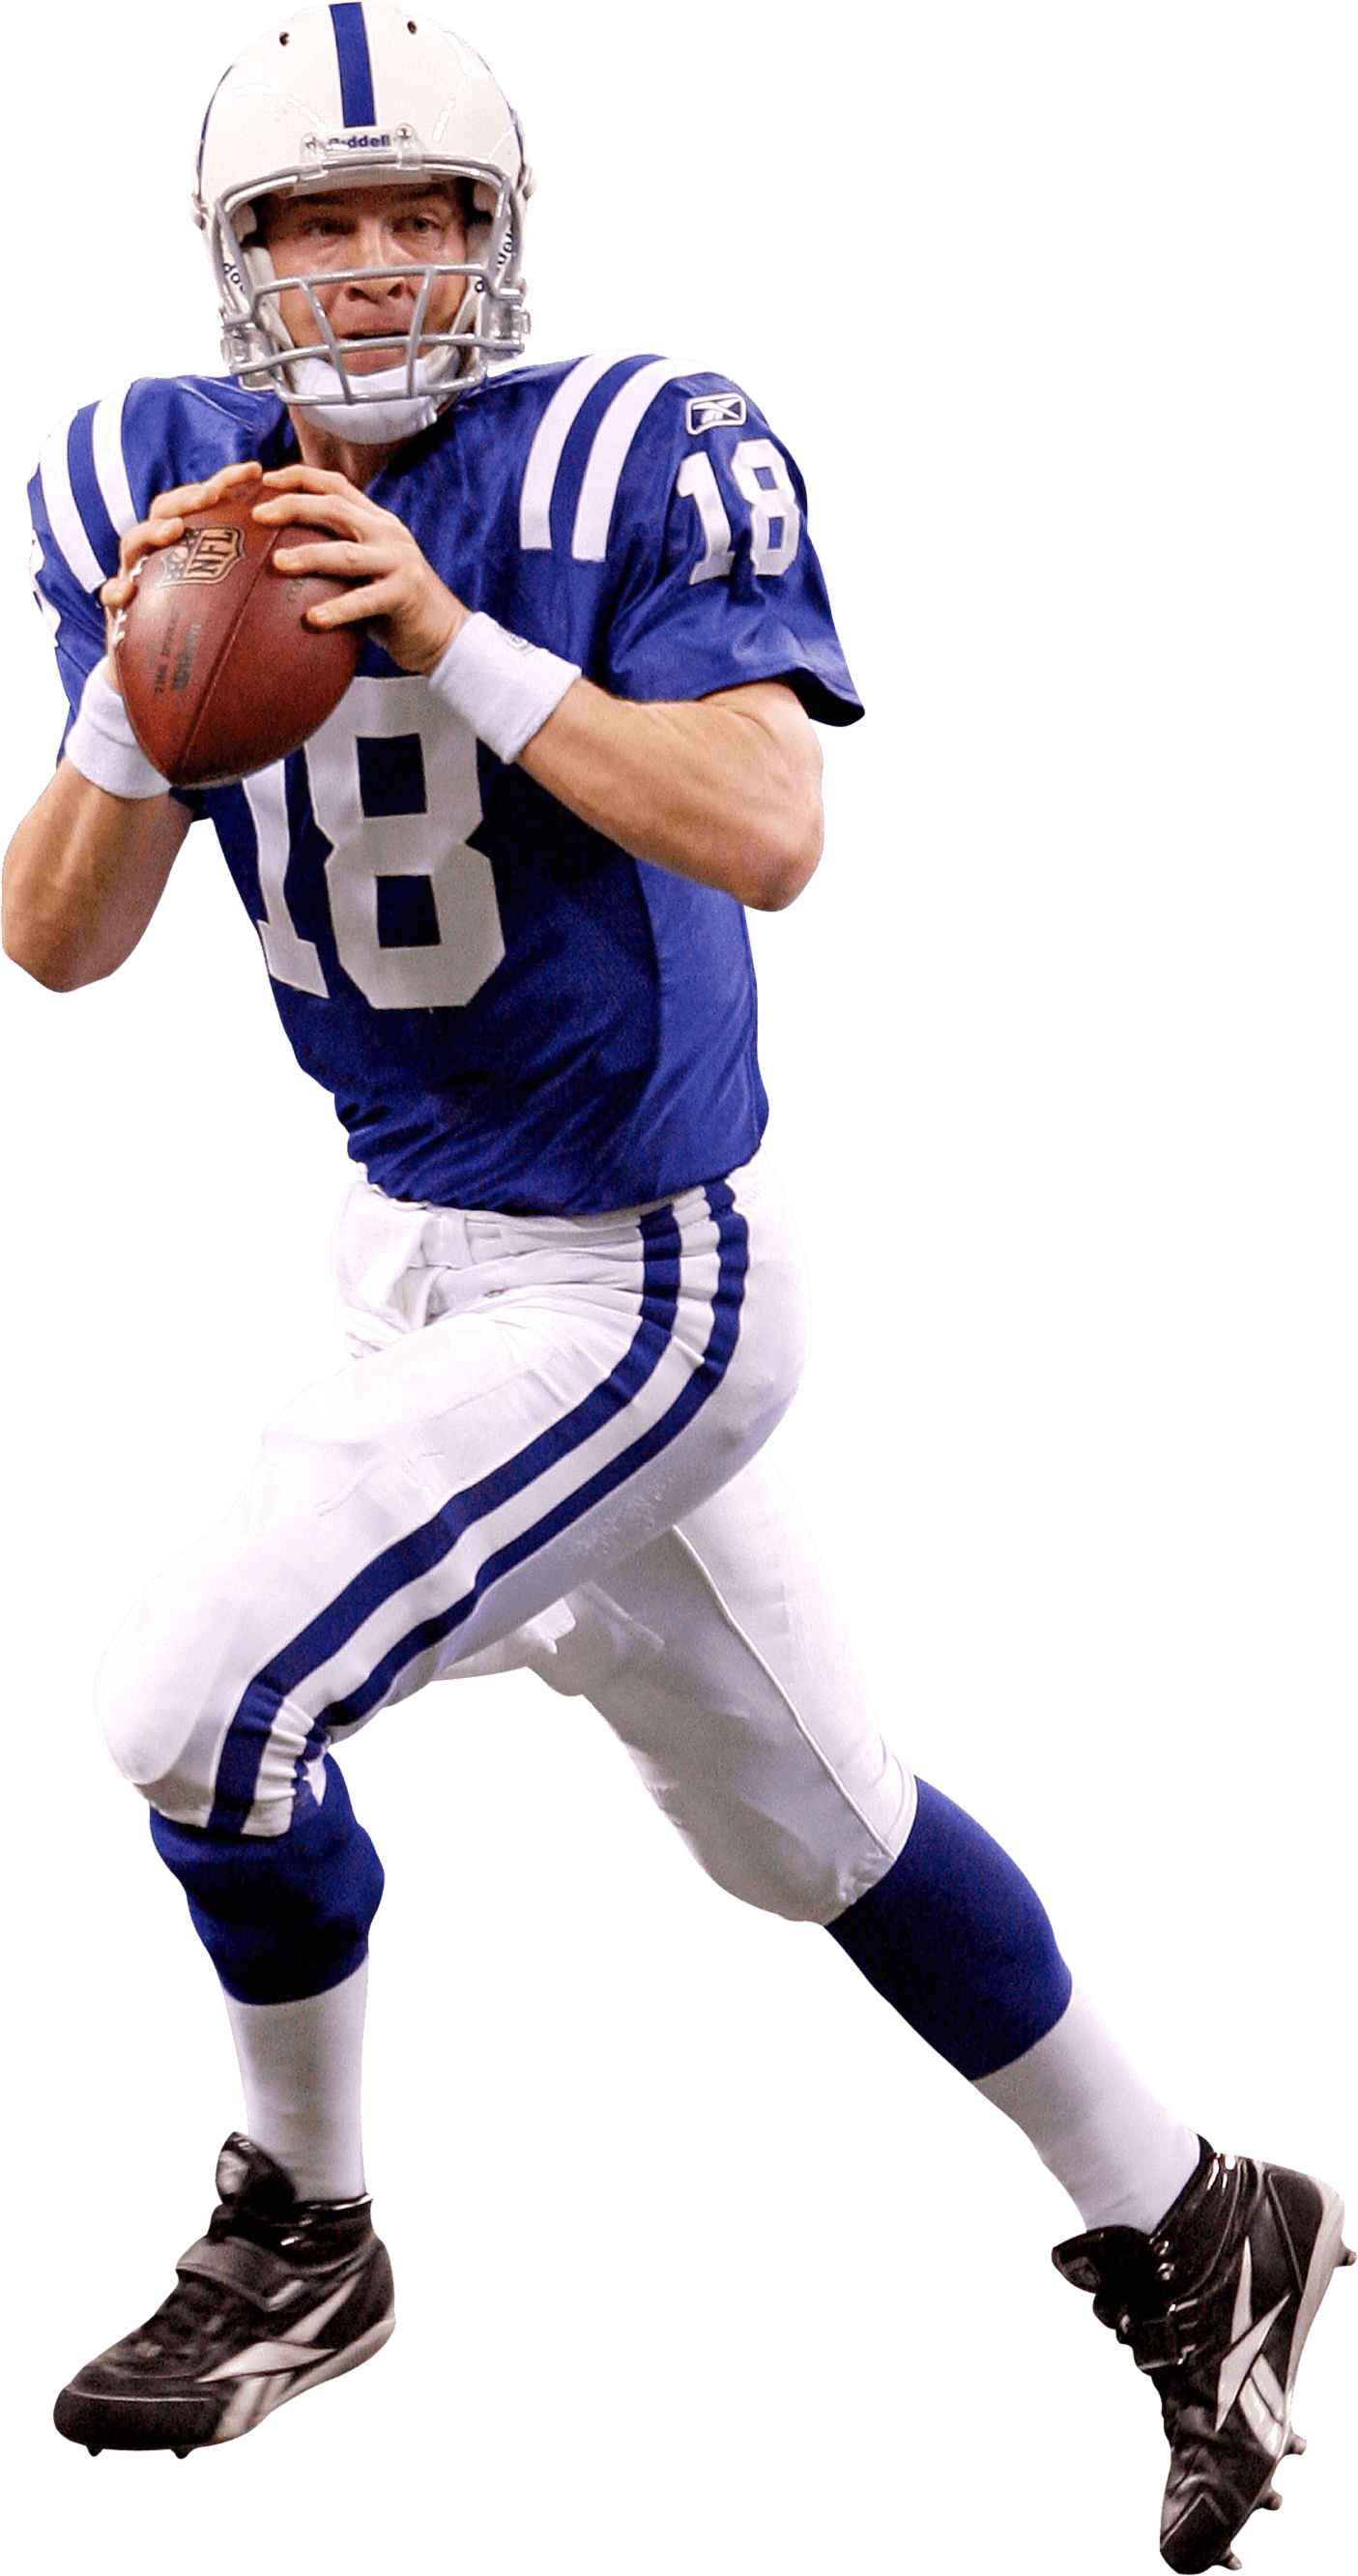 American Football Player Png Transparent Image Download Size 1405x2665px